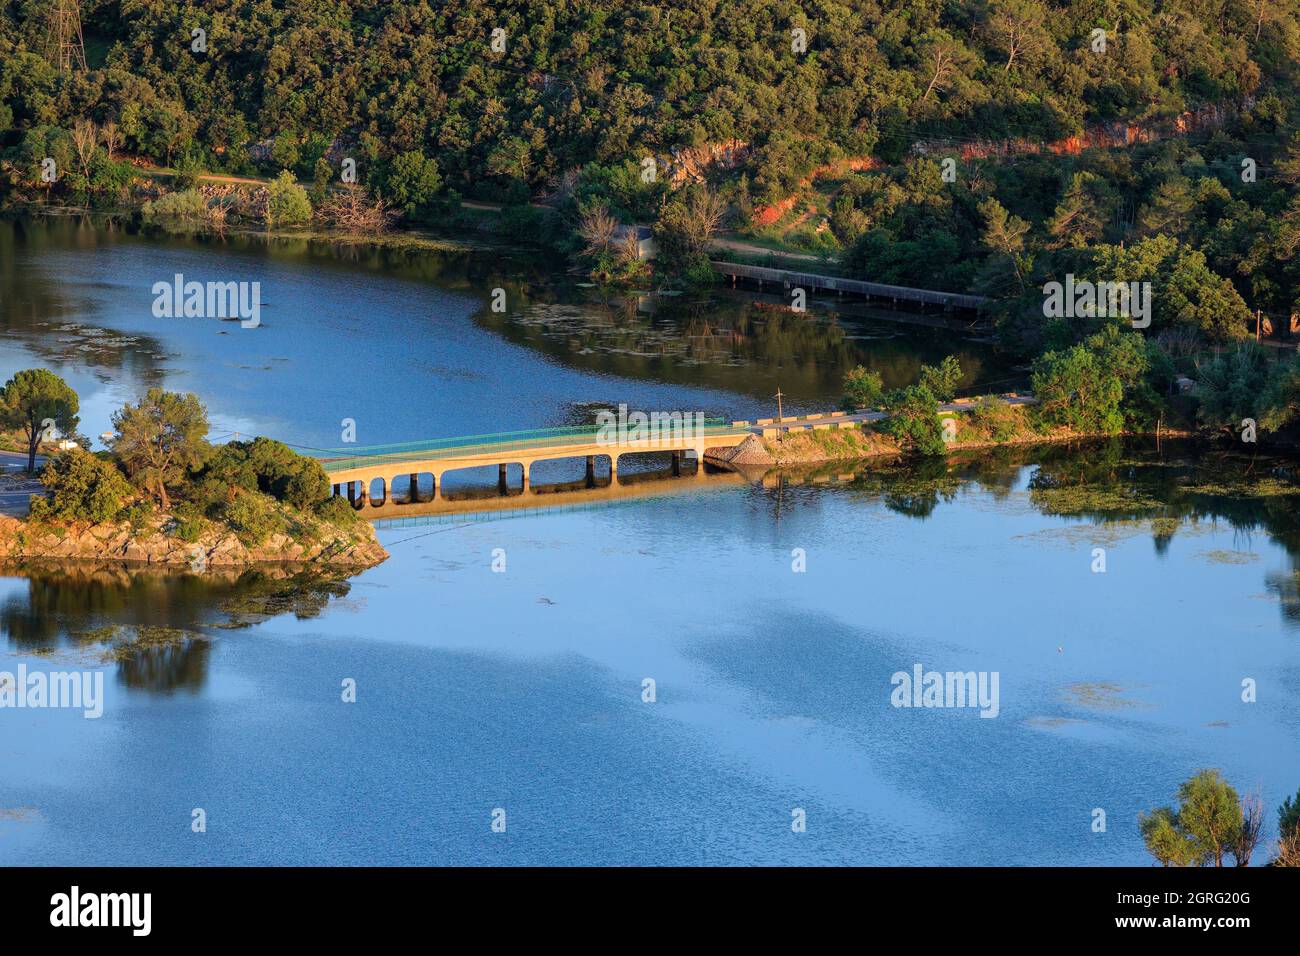 France, Var, Cabasse, Carces Sainte Suzanne lake, Issole river which flows into the lake Stock Photo